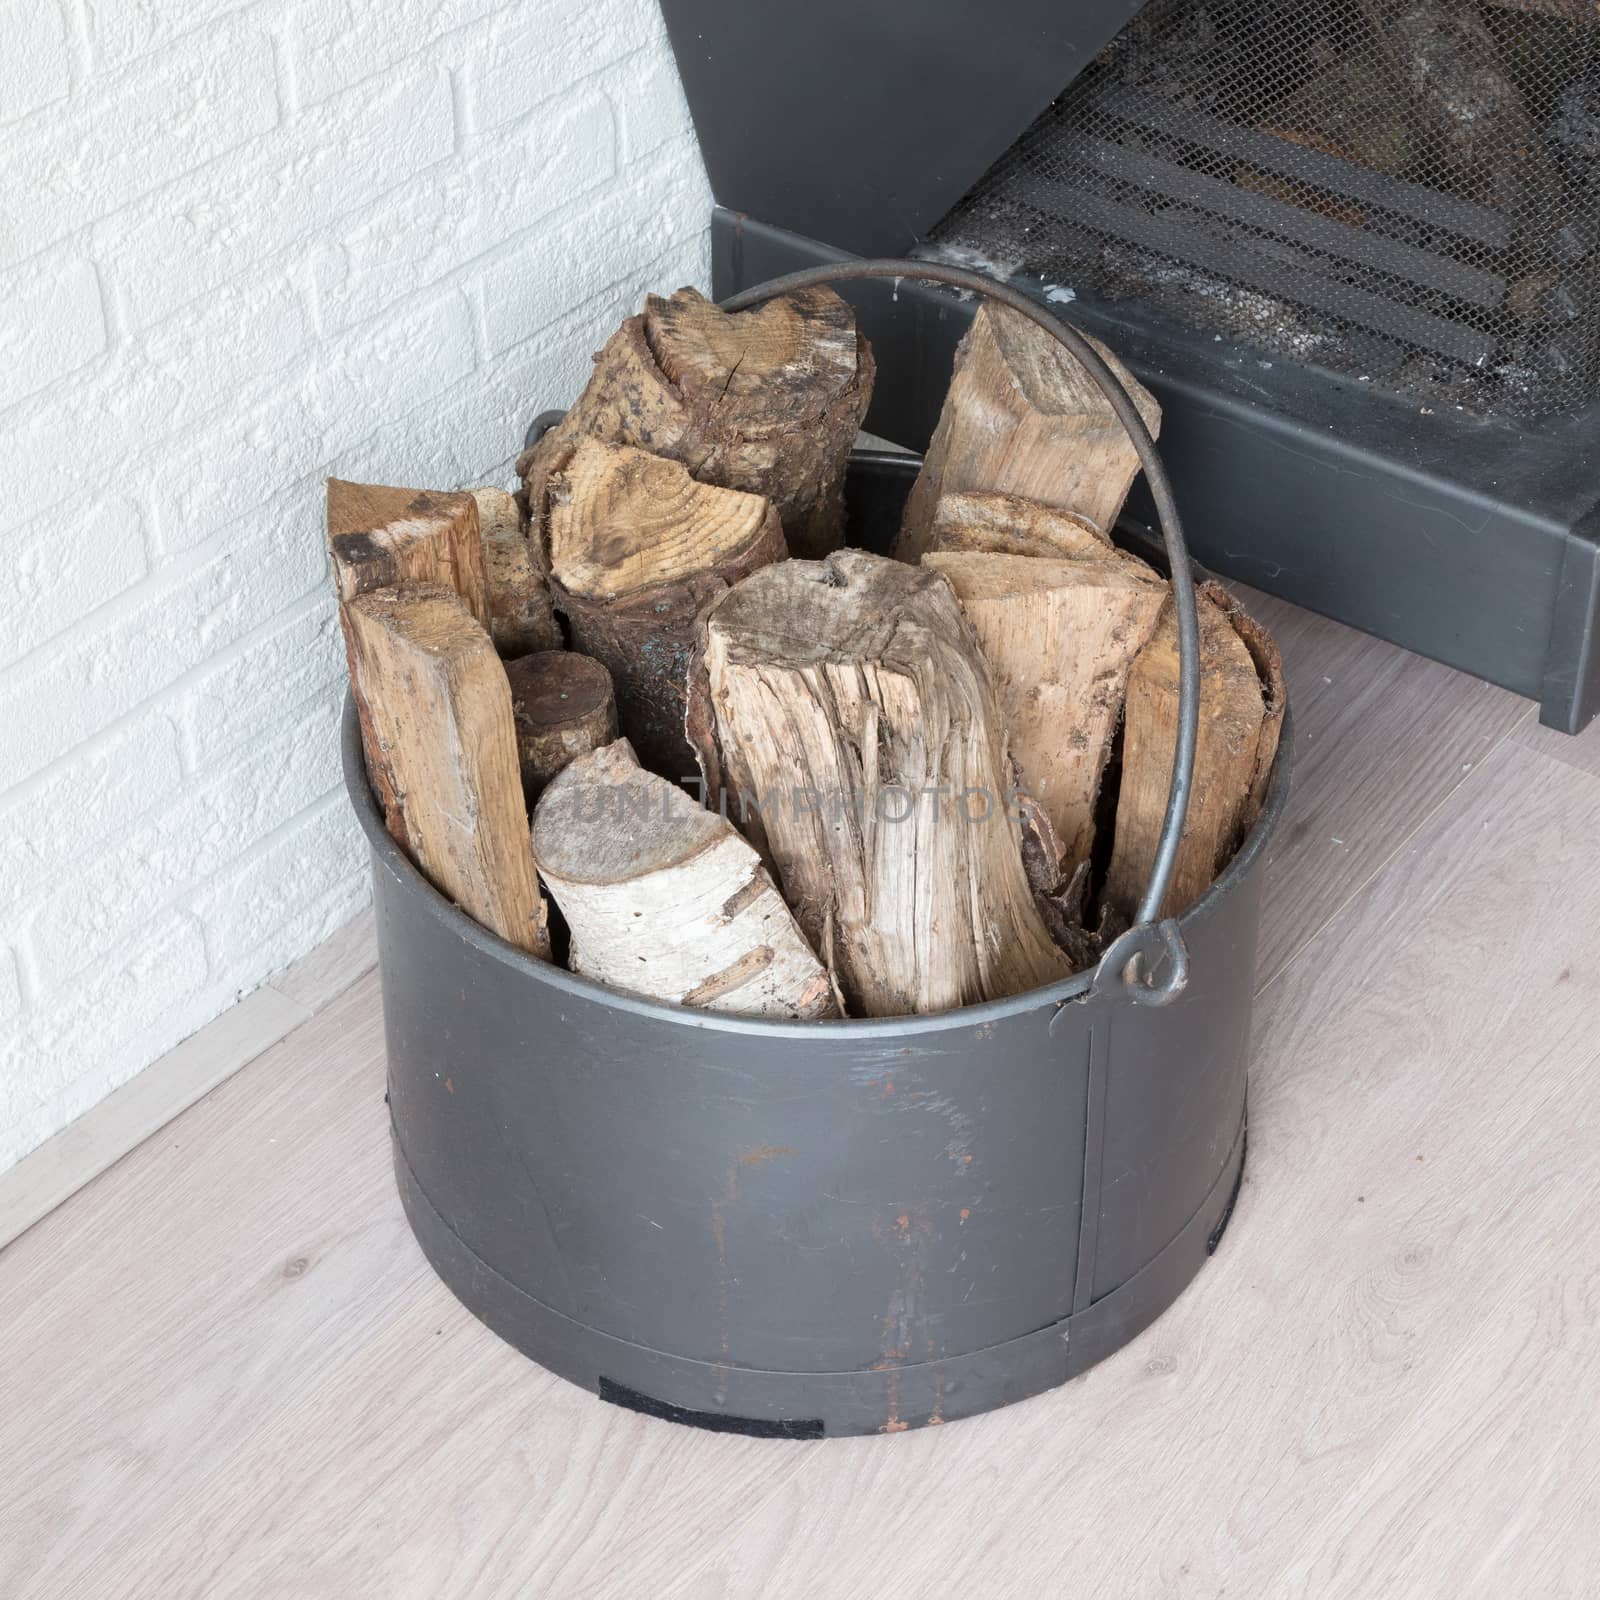 Metal basket of firewood, standing next to a fireplace